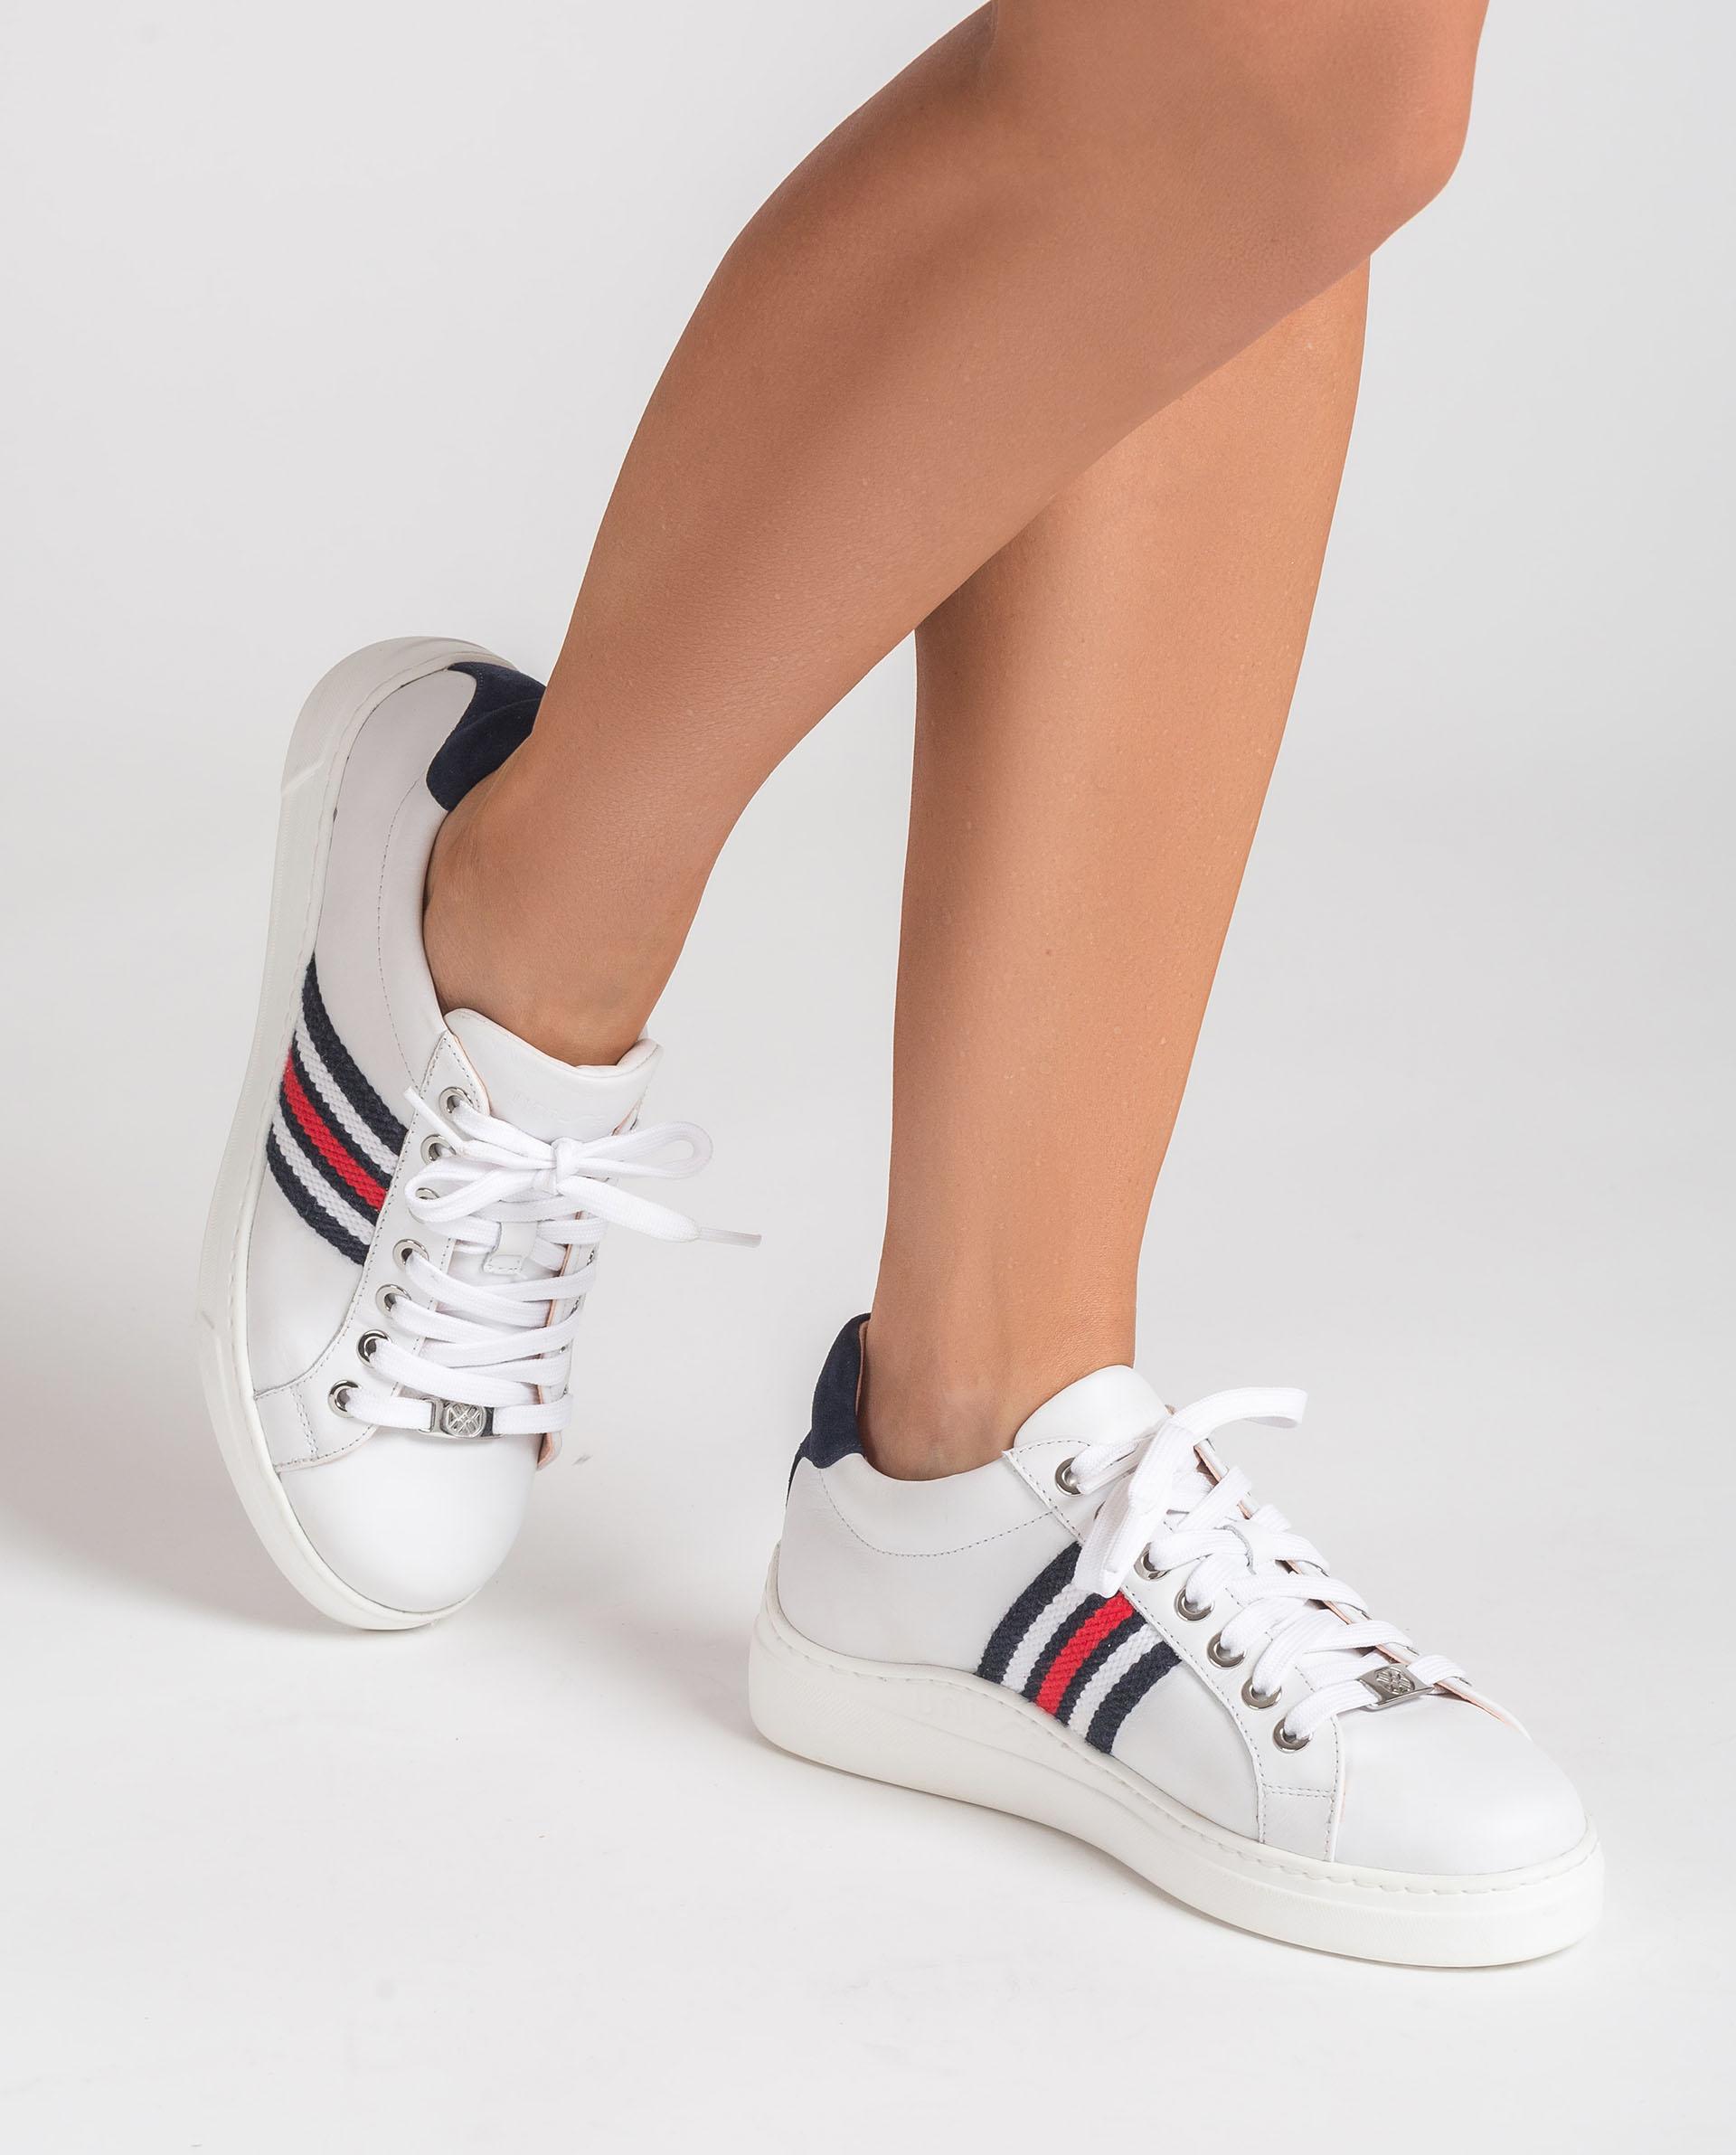 UNISA Leather sneakers embellished with multi-coloured band FAROLA_21_NF 2